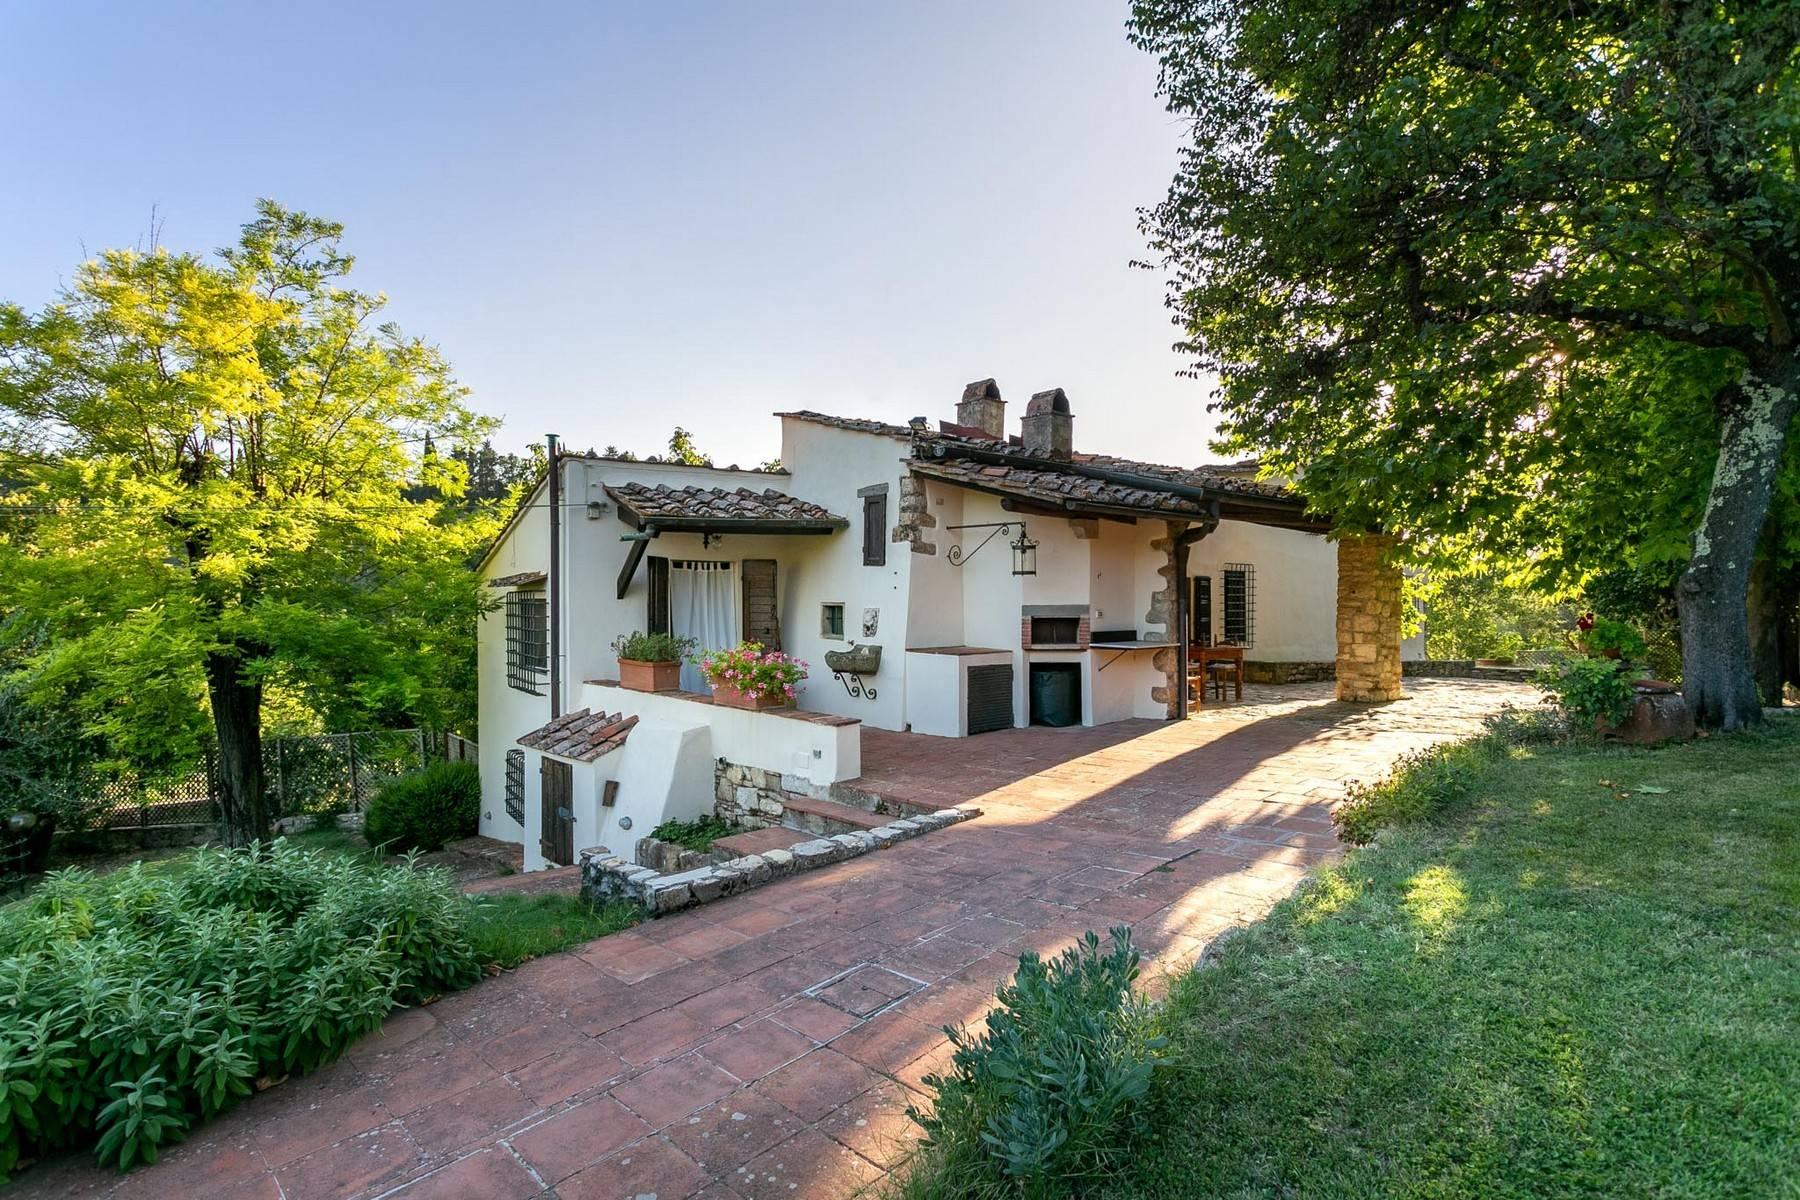 Villa immersed in a 7,000 sqm garden close to Florence - 1